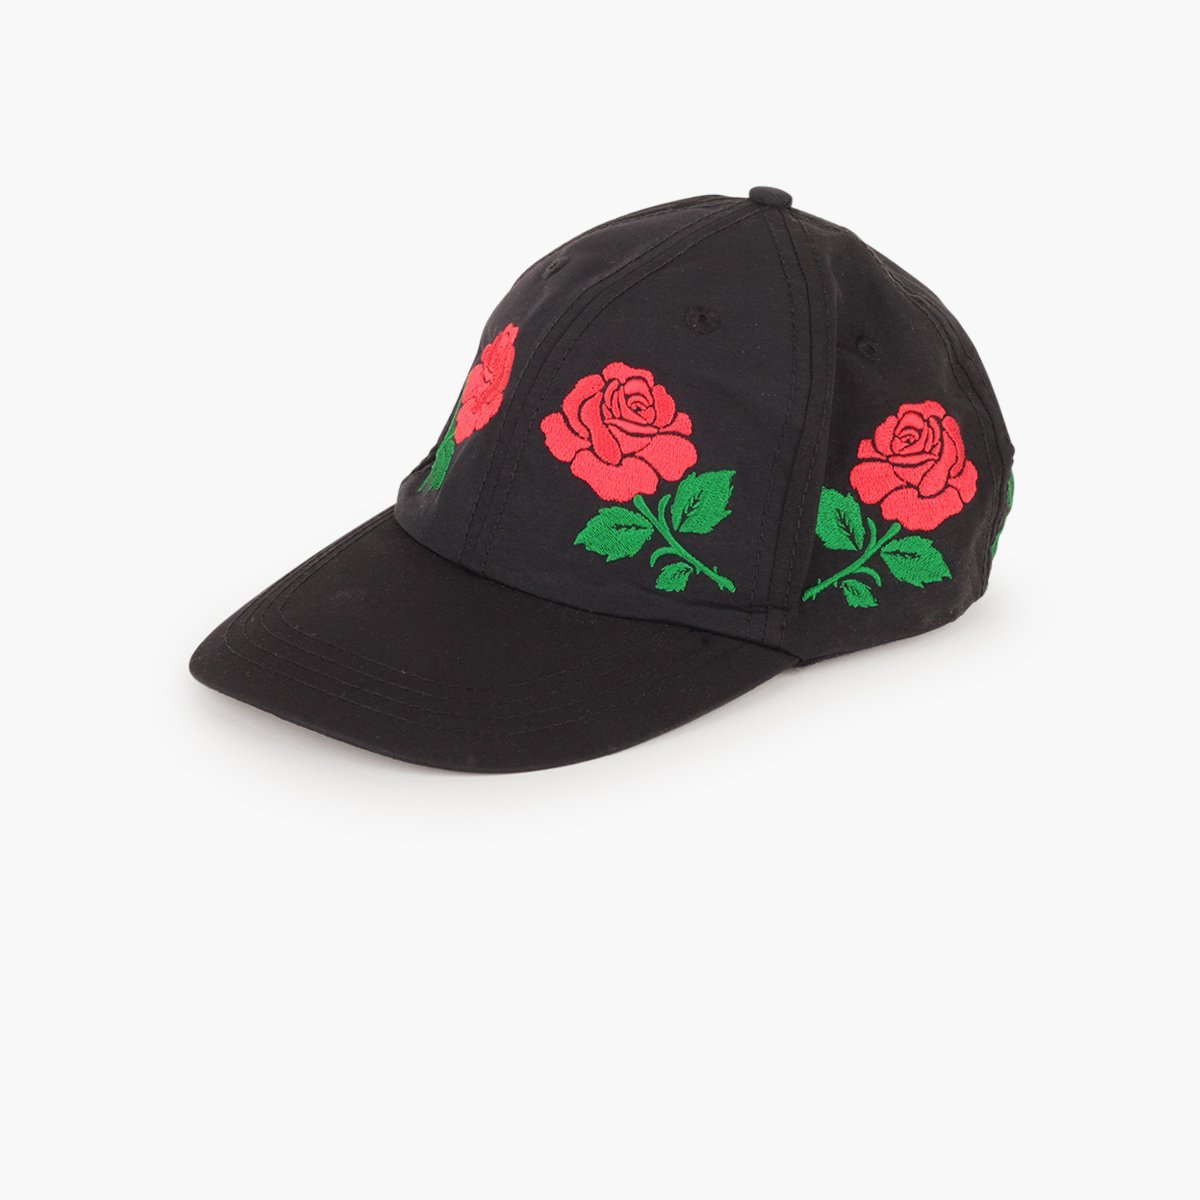 Chinatown Market Thank You Rose Hat-CTMF18-TYRH-Black-One Size-SUEDE Store